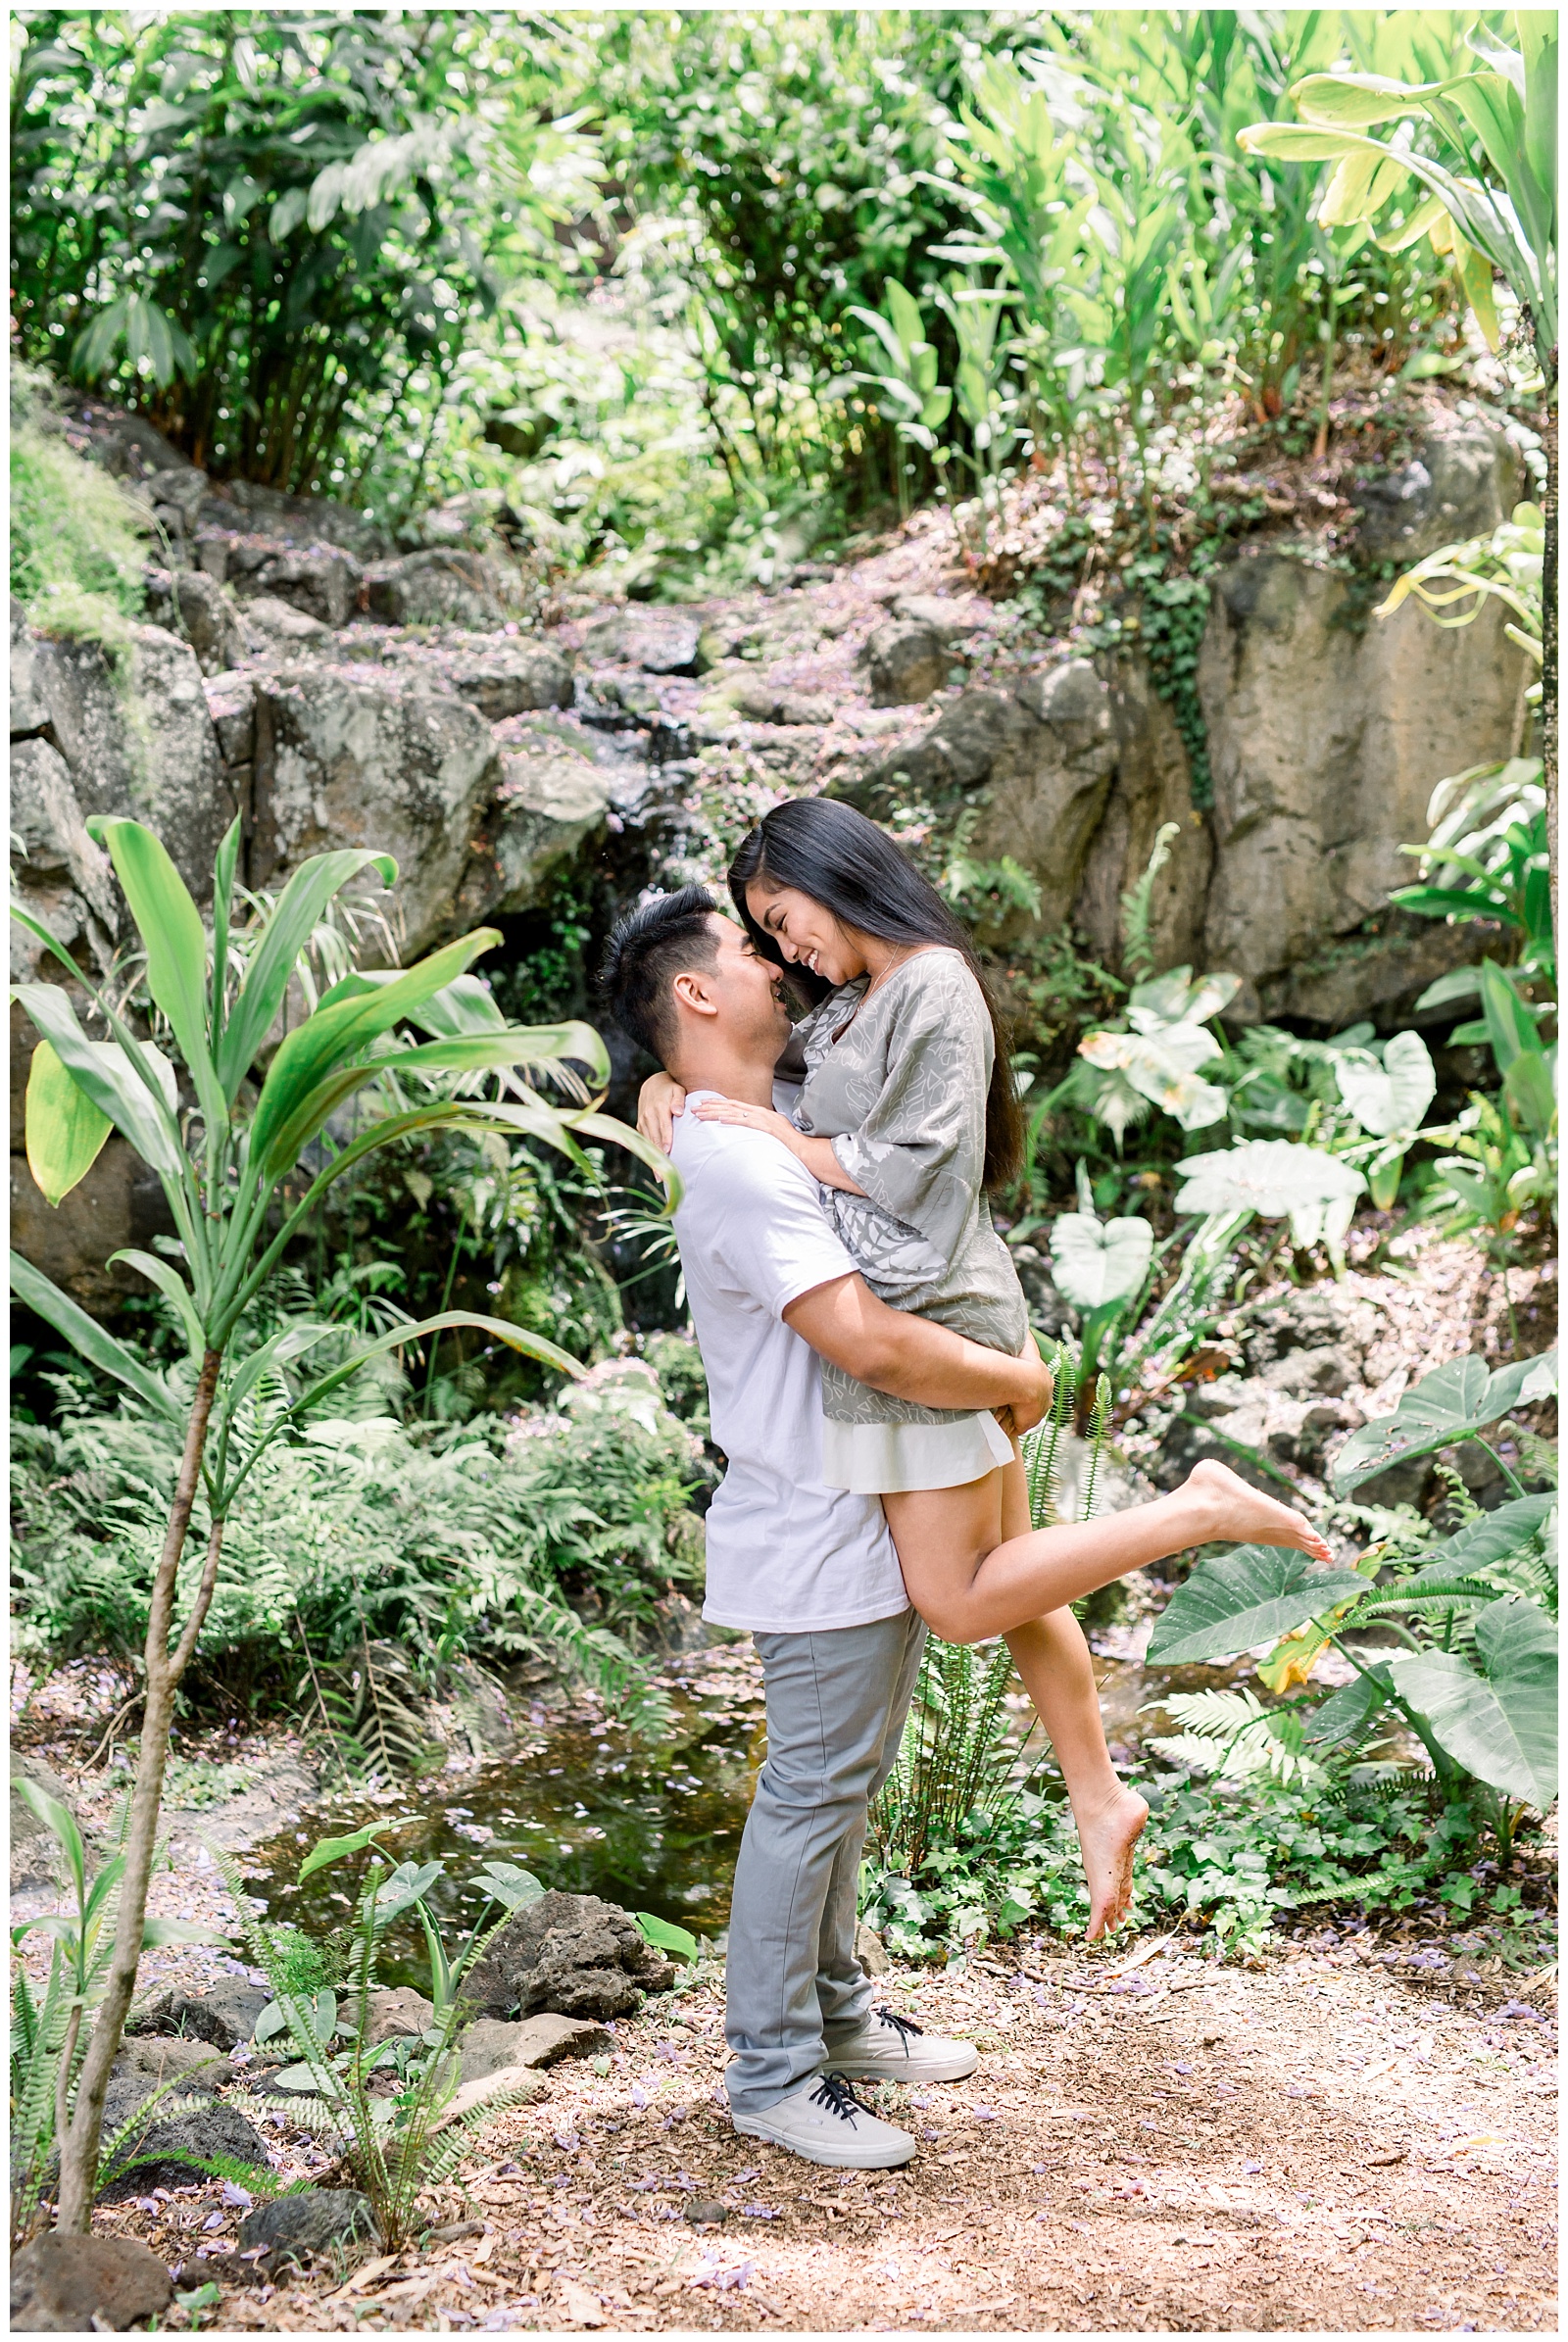 Close up of guy lifting his fiance off her feet to kiss her in romantic 'The Notebook' embrace- Maui Hawaii Engagement-Kula Botanical Gardens Engagement - Ali'i Kula Lavendar Farm Engagement | Maui Hawaii and Destination, Engagement, Elopement and Wedding Photographer Monica Roberts Photography | www.monicaroberts.com